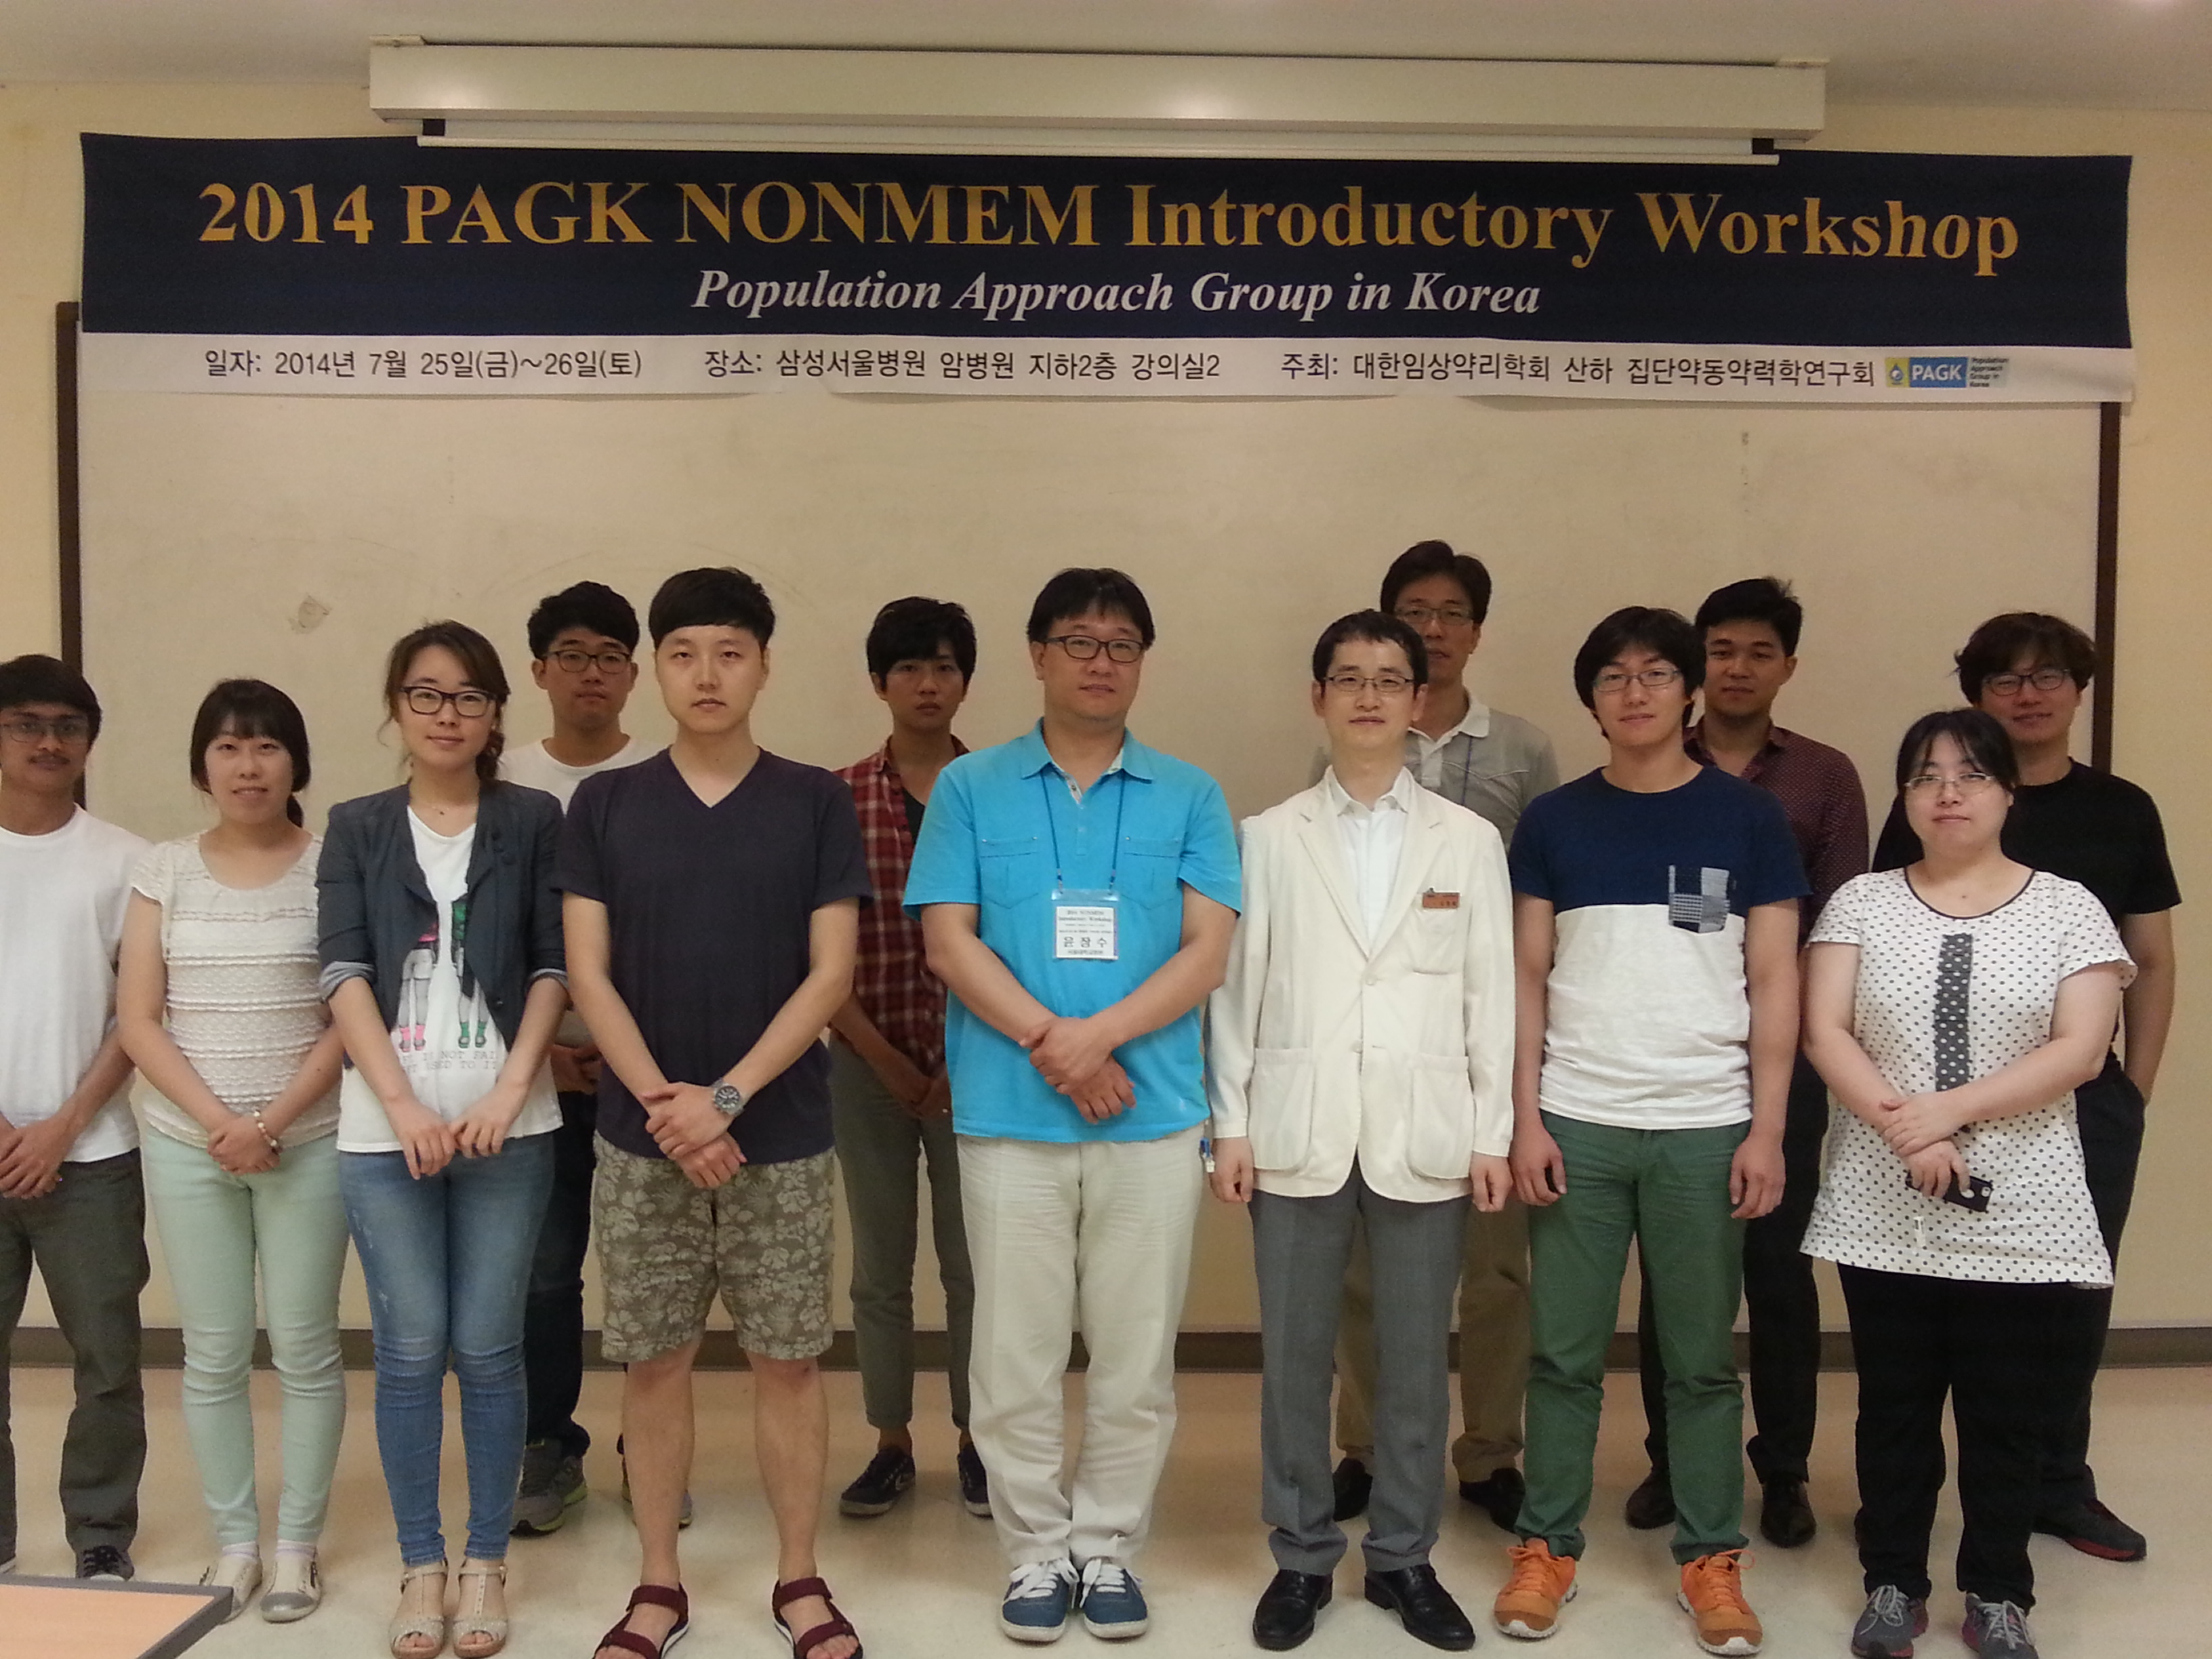 2014 7th PAGK NONMEM Introductory Workshop